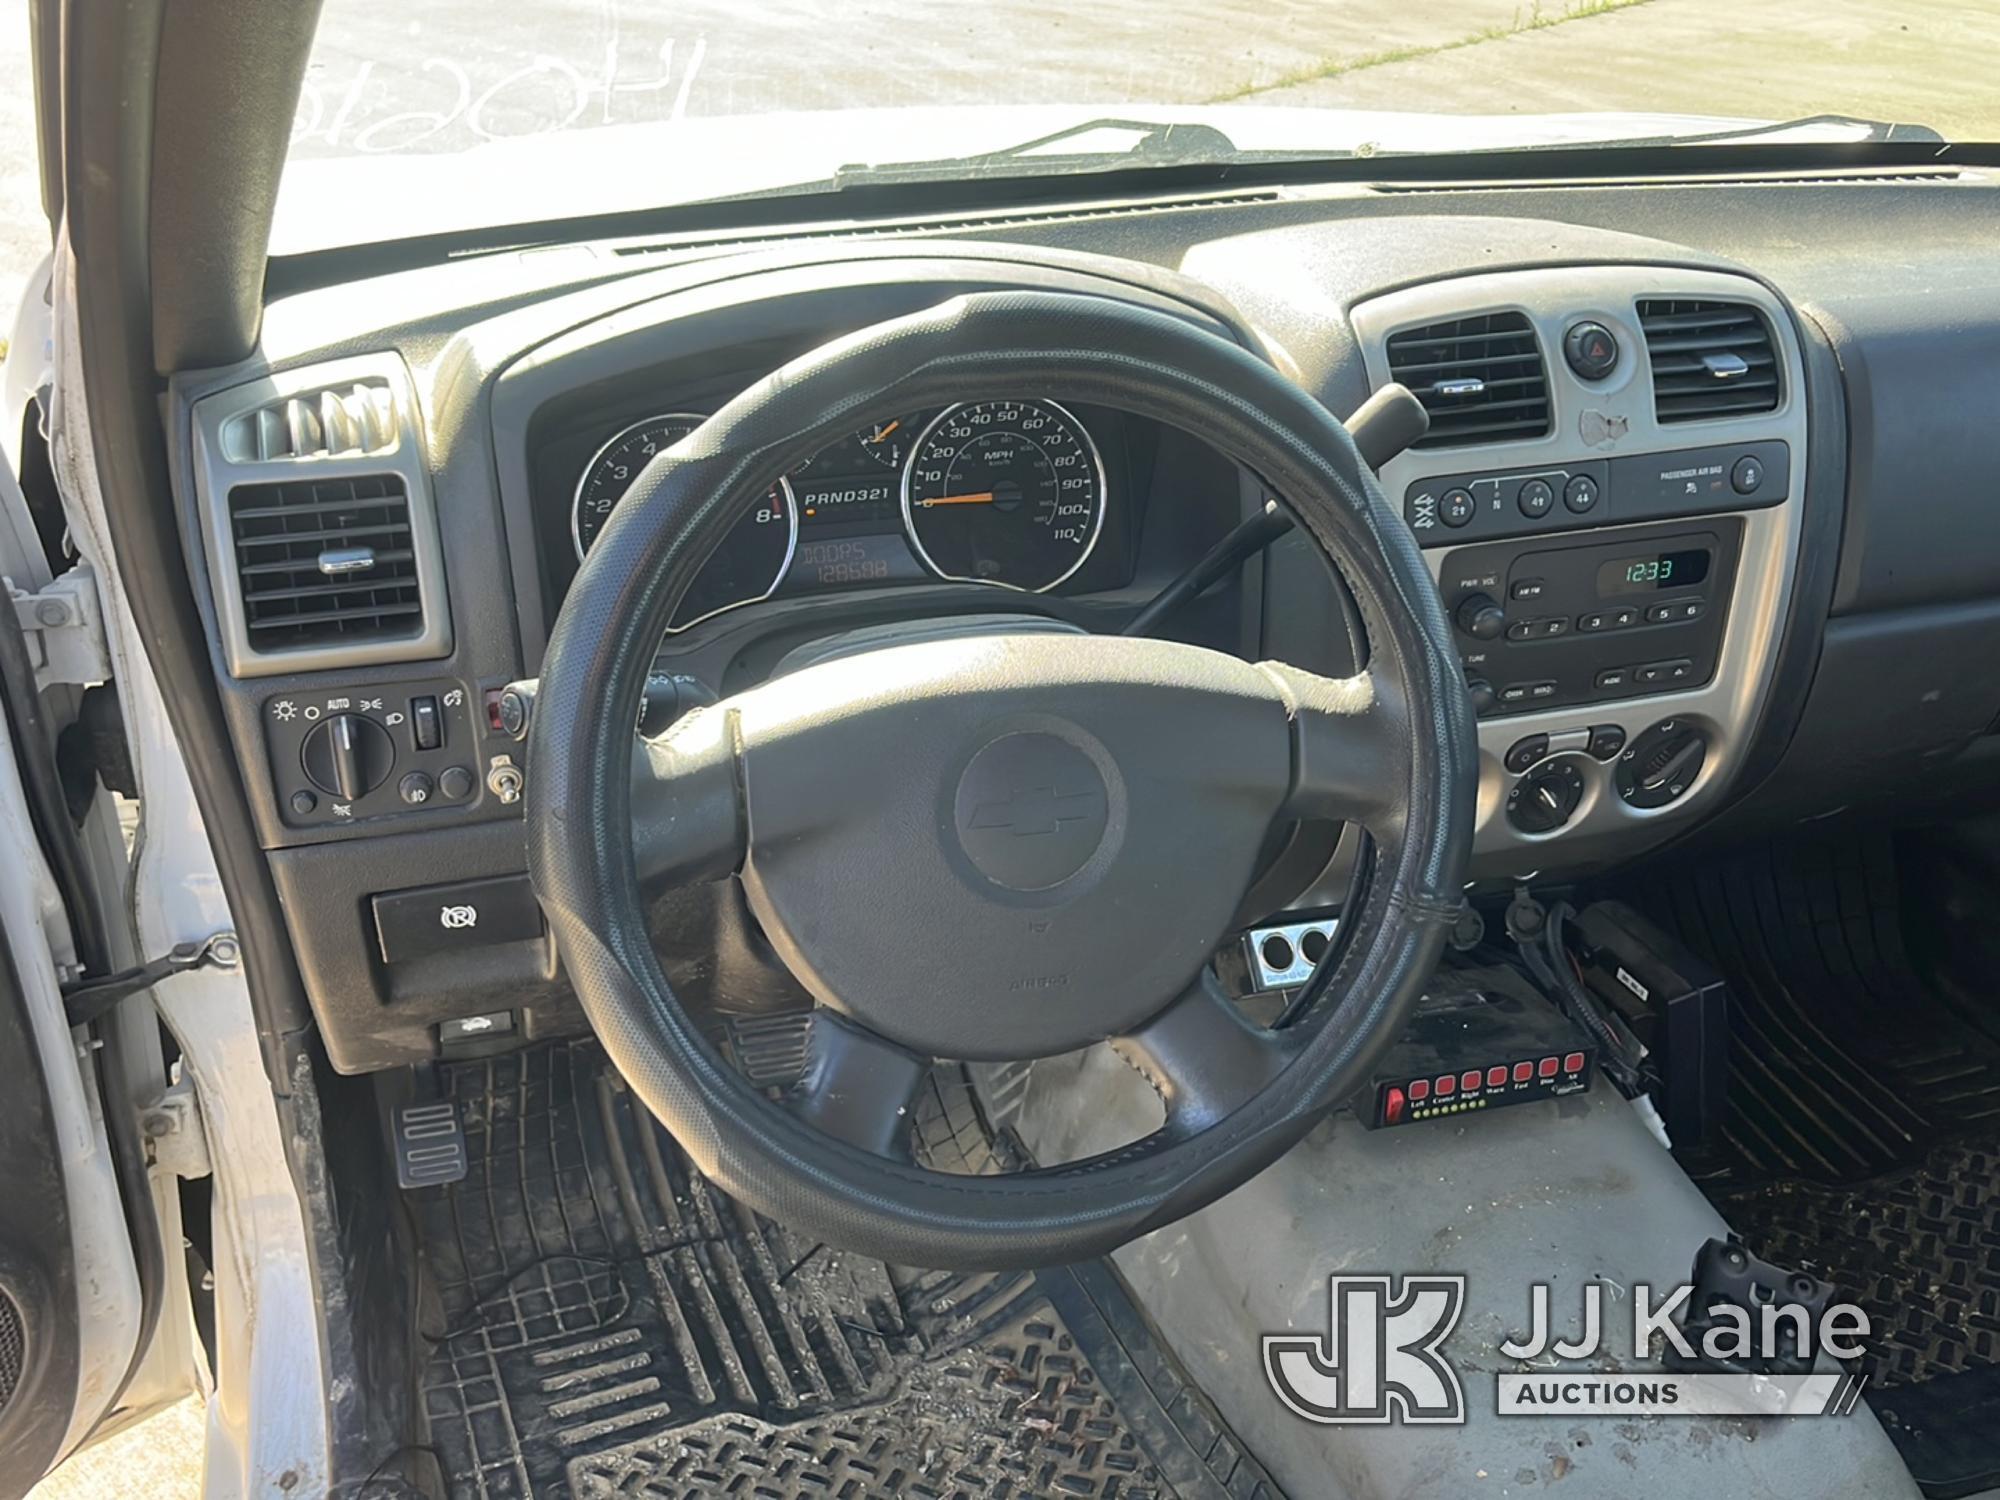 (Conway, AR) 2012 Chevrolet Colorado 4x4 Extended-Cab Pickup Truck Runs & Moves) (Jump To Start, Das